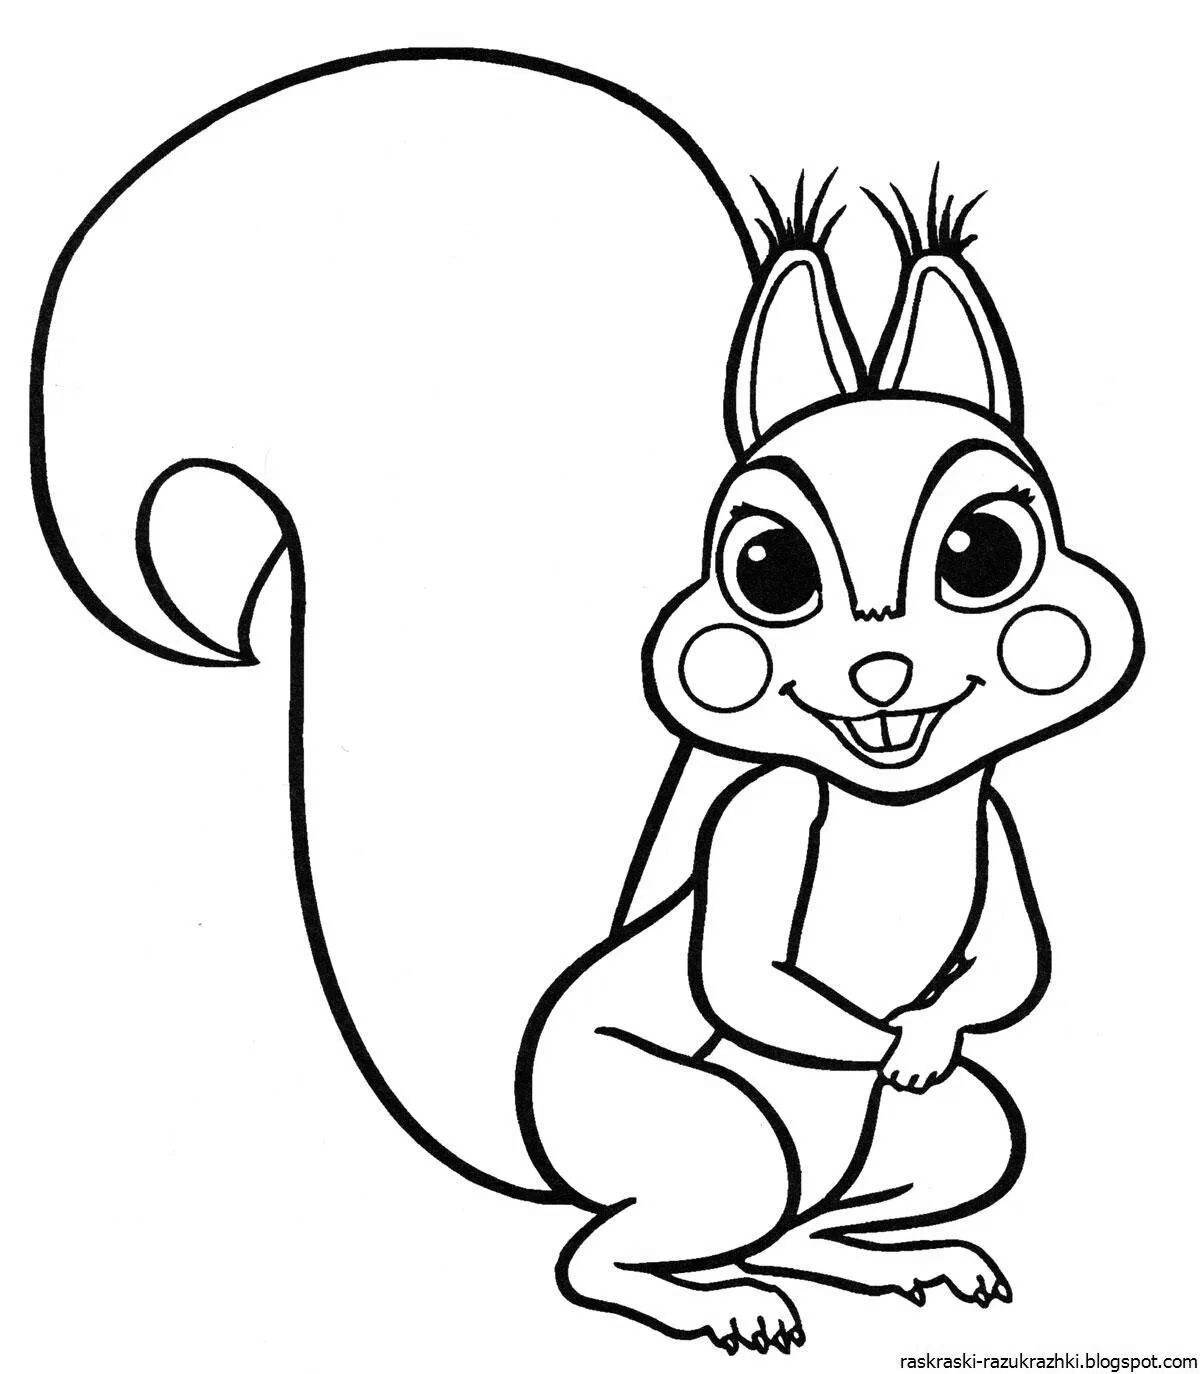 Squirrel for children 3 4 years old #3